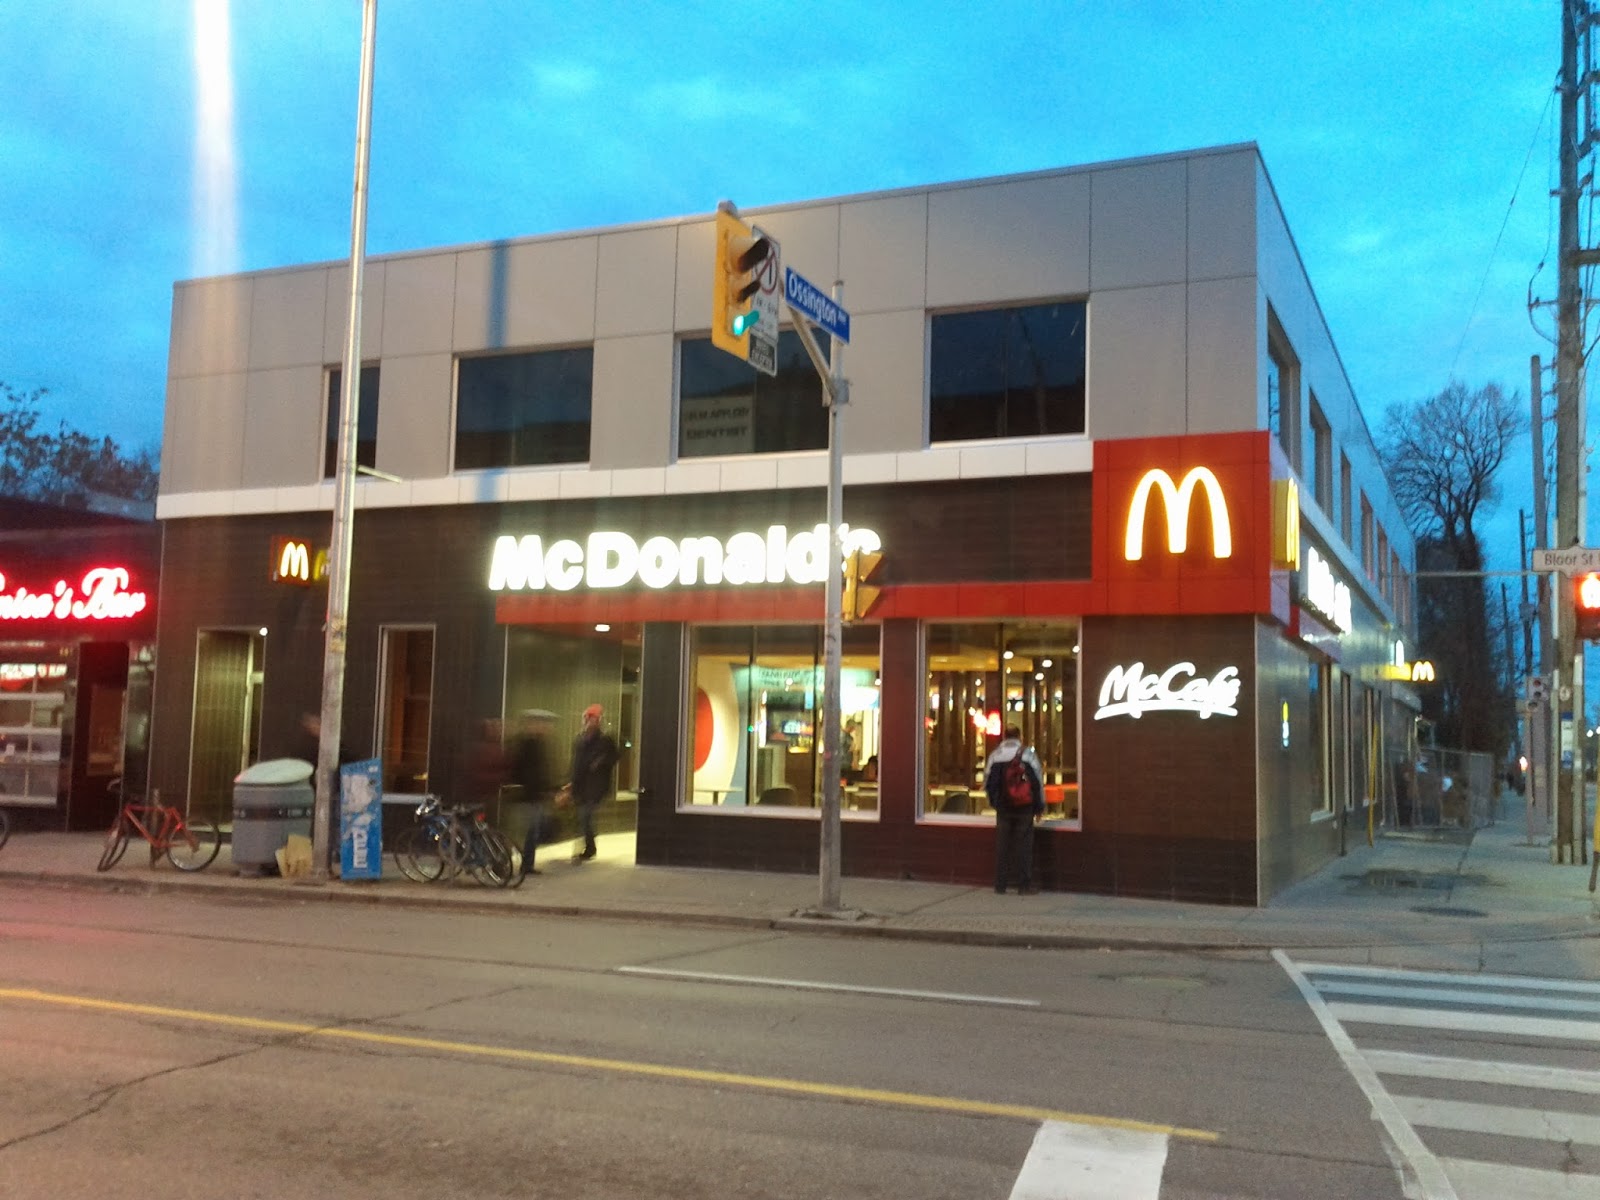 Toronto things: McDonalds open at Ossington and Bloor